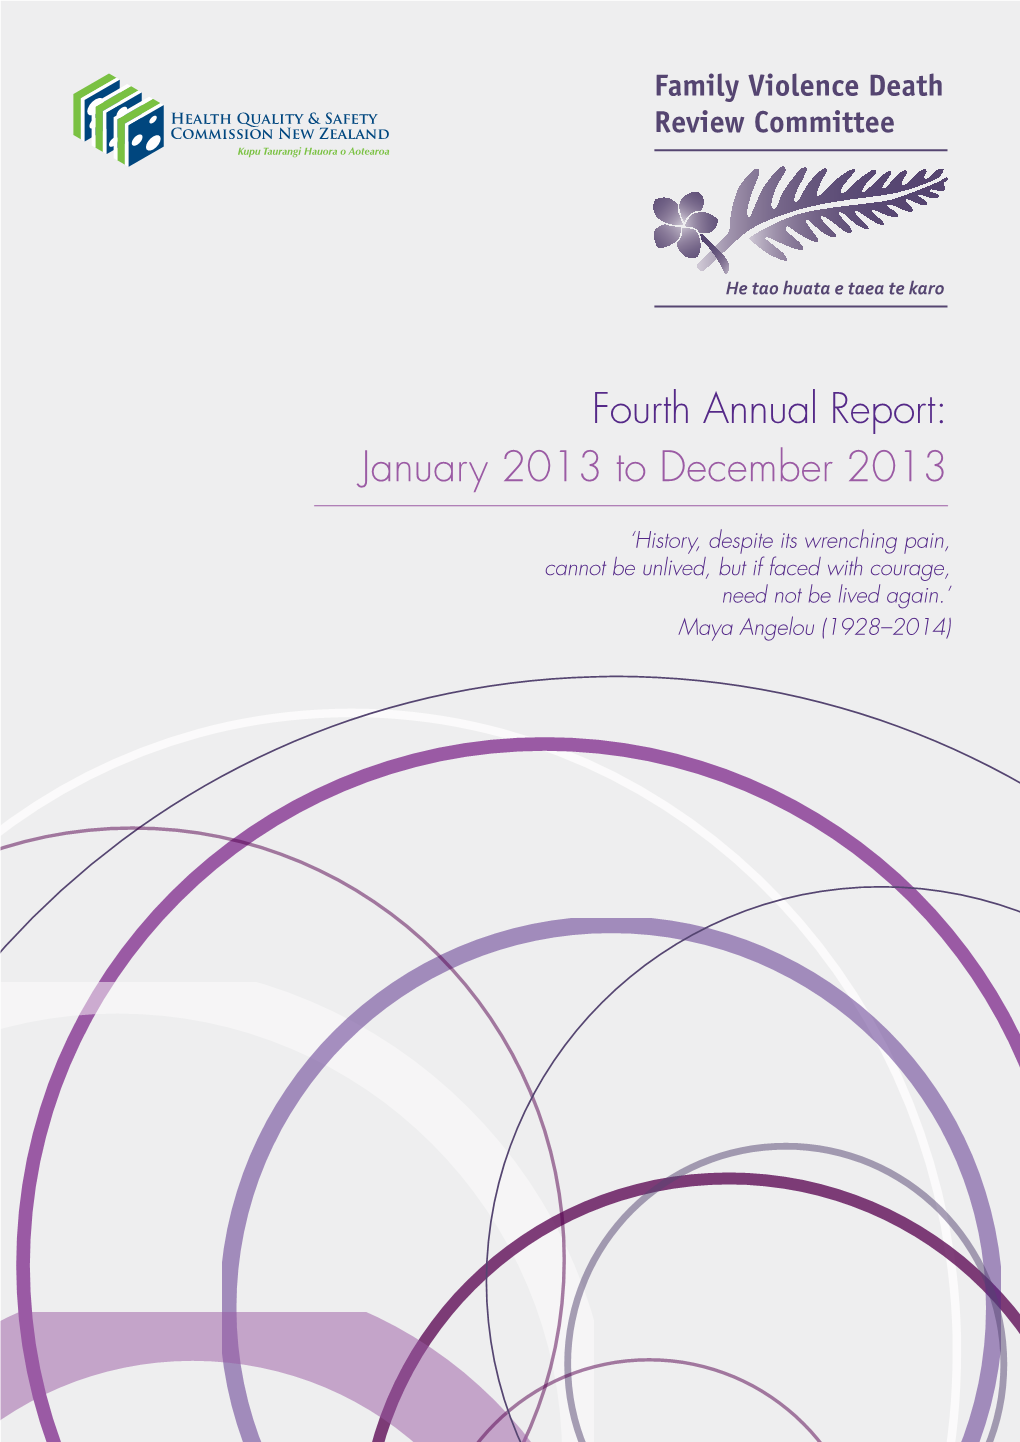 Family Violence Death Review Committee FOURTH ANNUAL REPORT JANUARY 2013 to DECEMBER 2013 1 2 Foreword